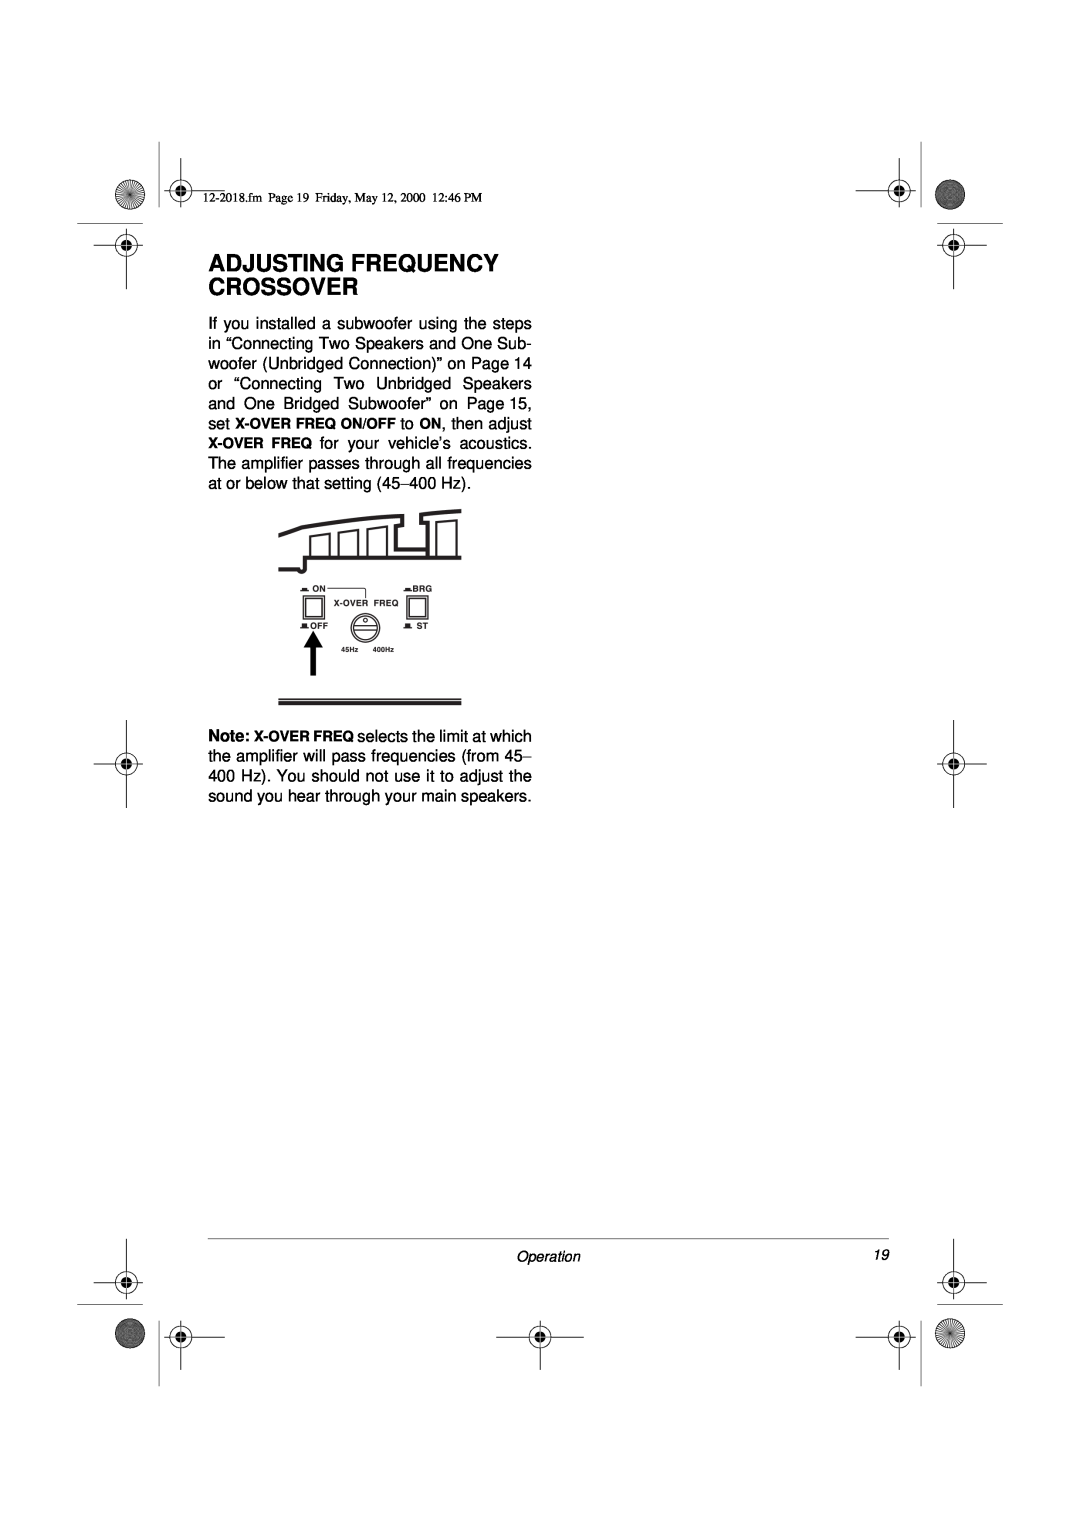 Radio Shack XL-400 owner manual Adjusting Frequency Crossover, Operation 